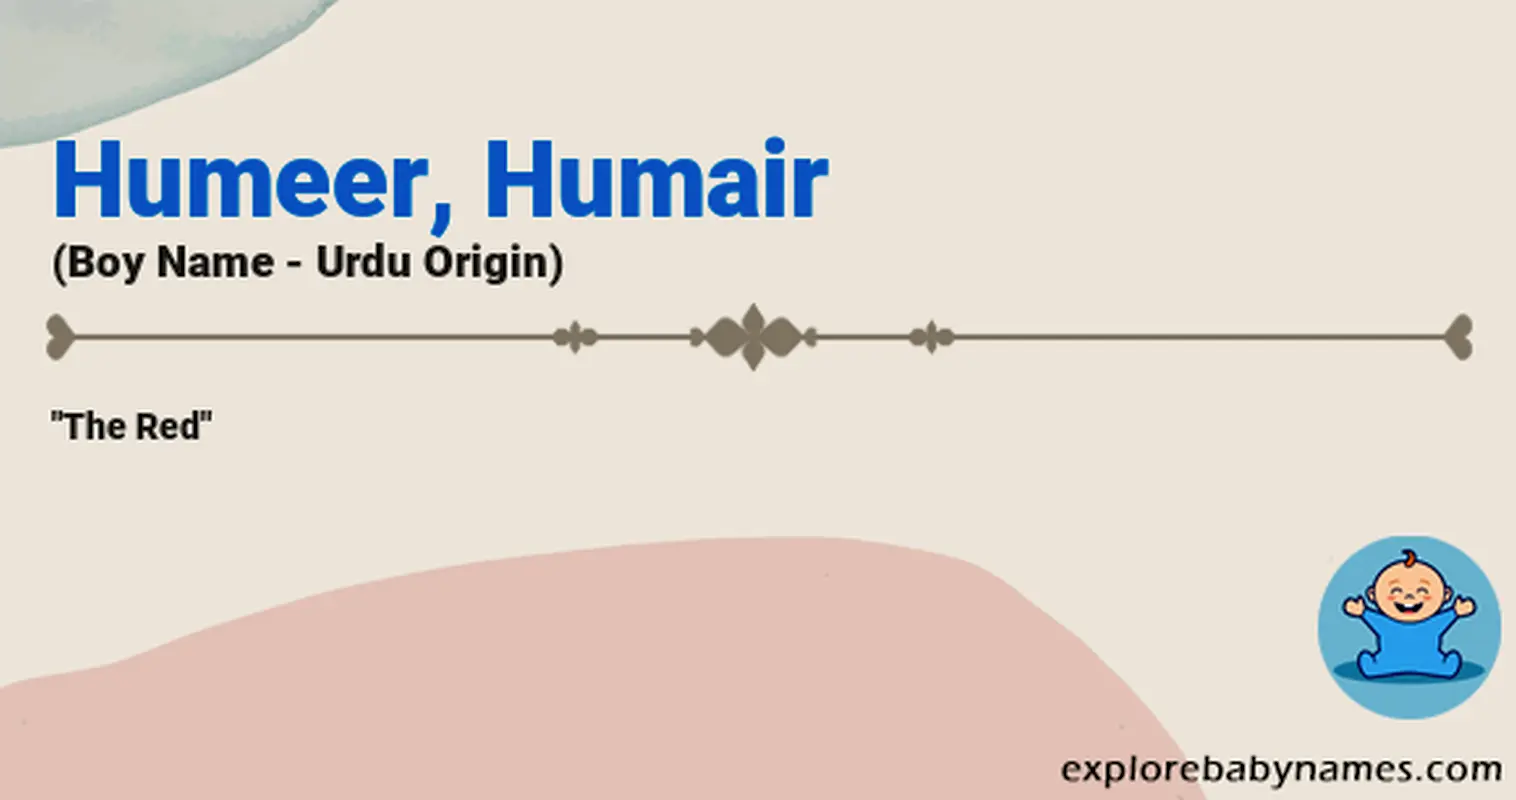 Meaning of Humeer, Humair